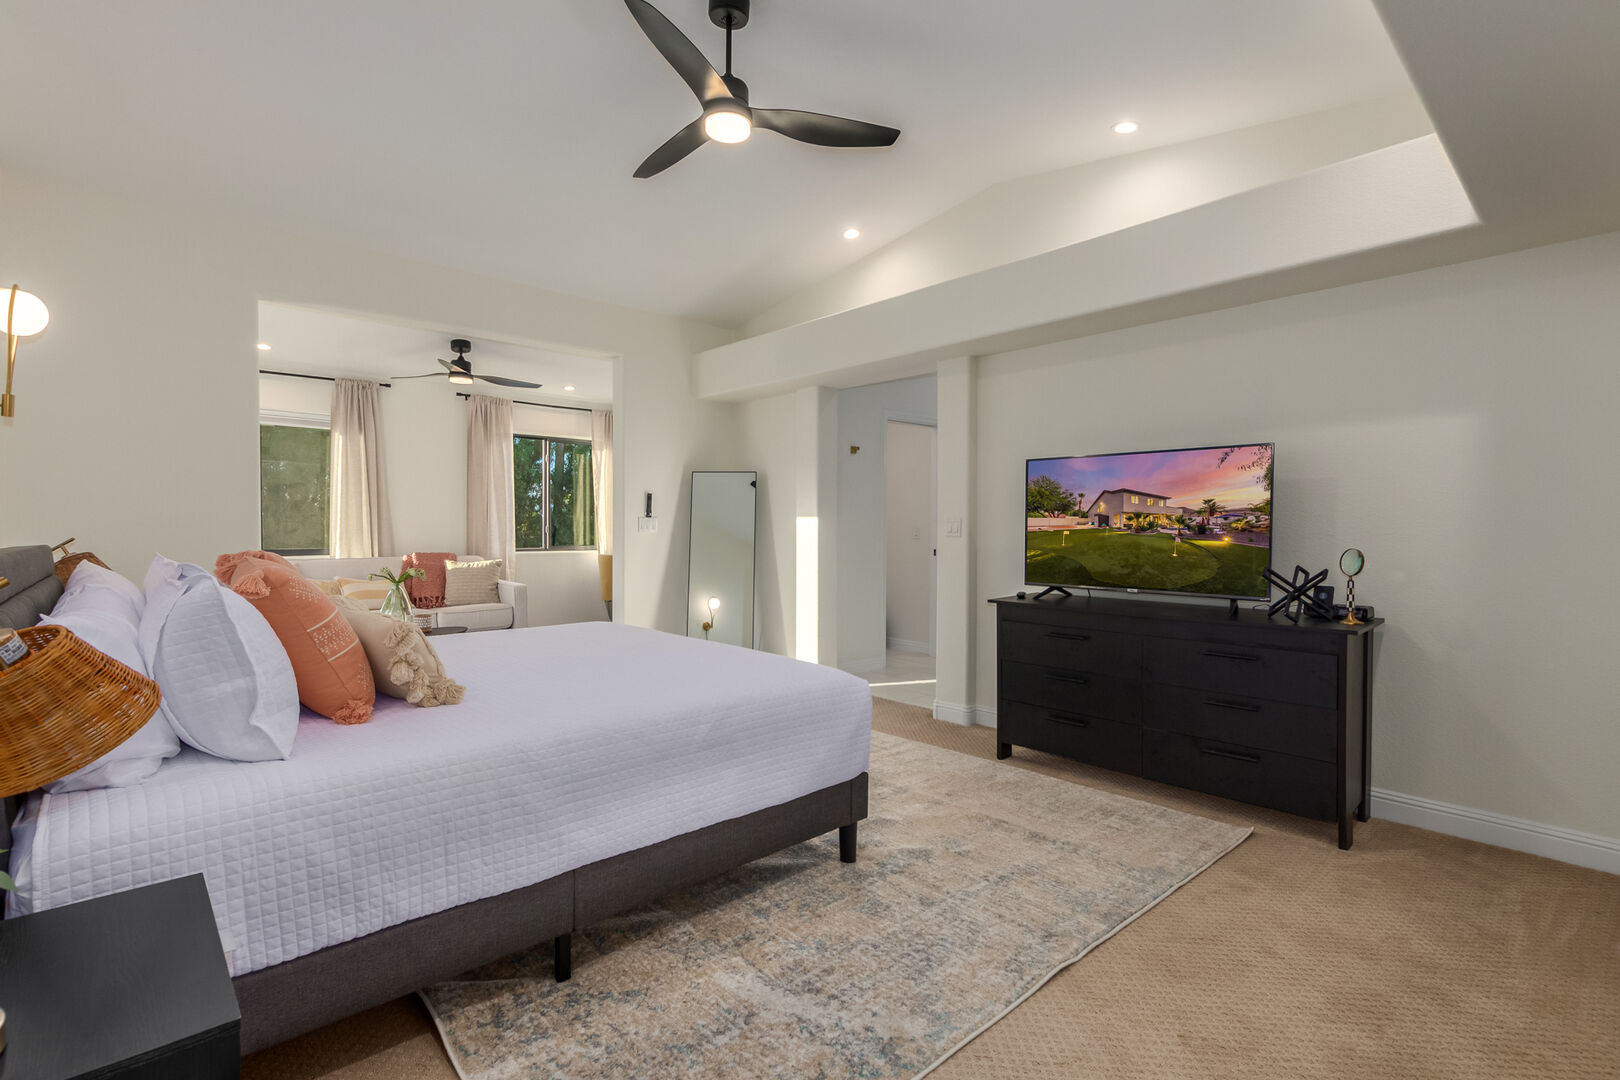 Master bedroom with television and seating area.